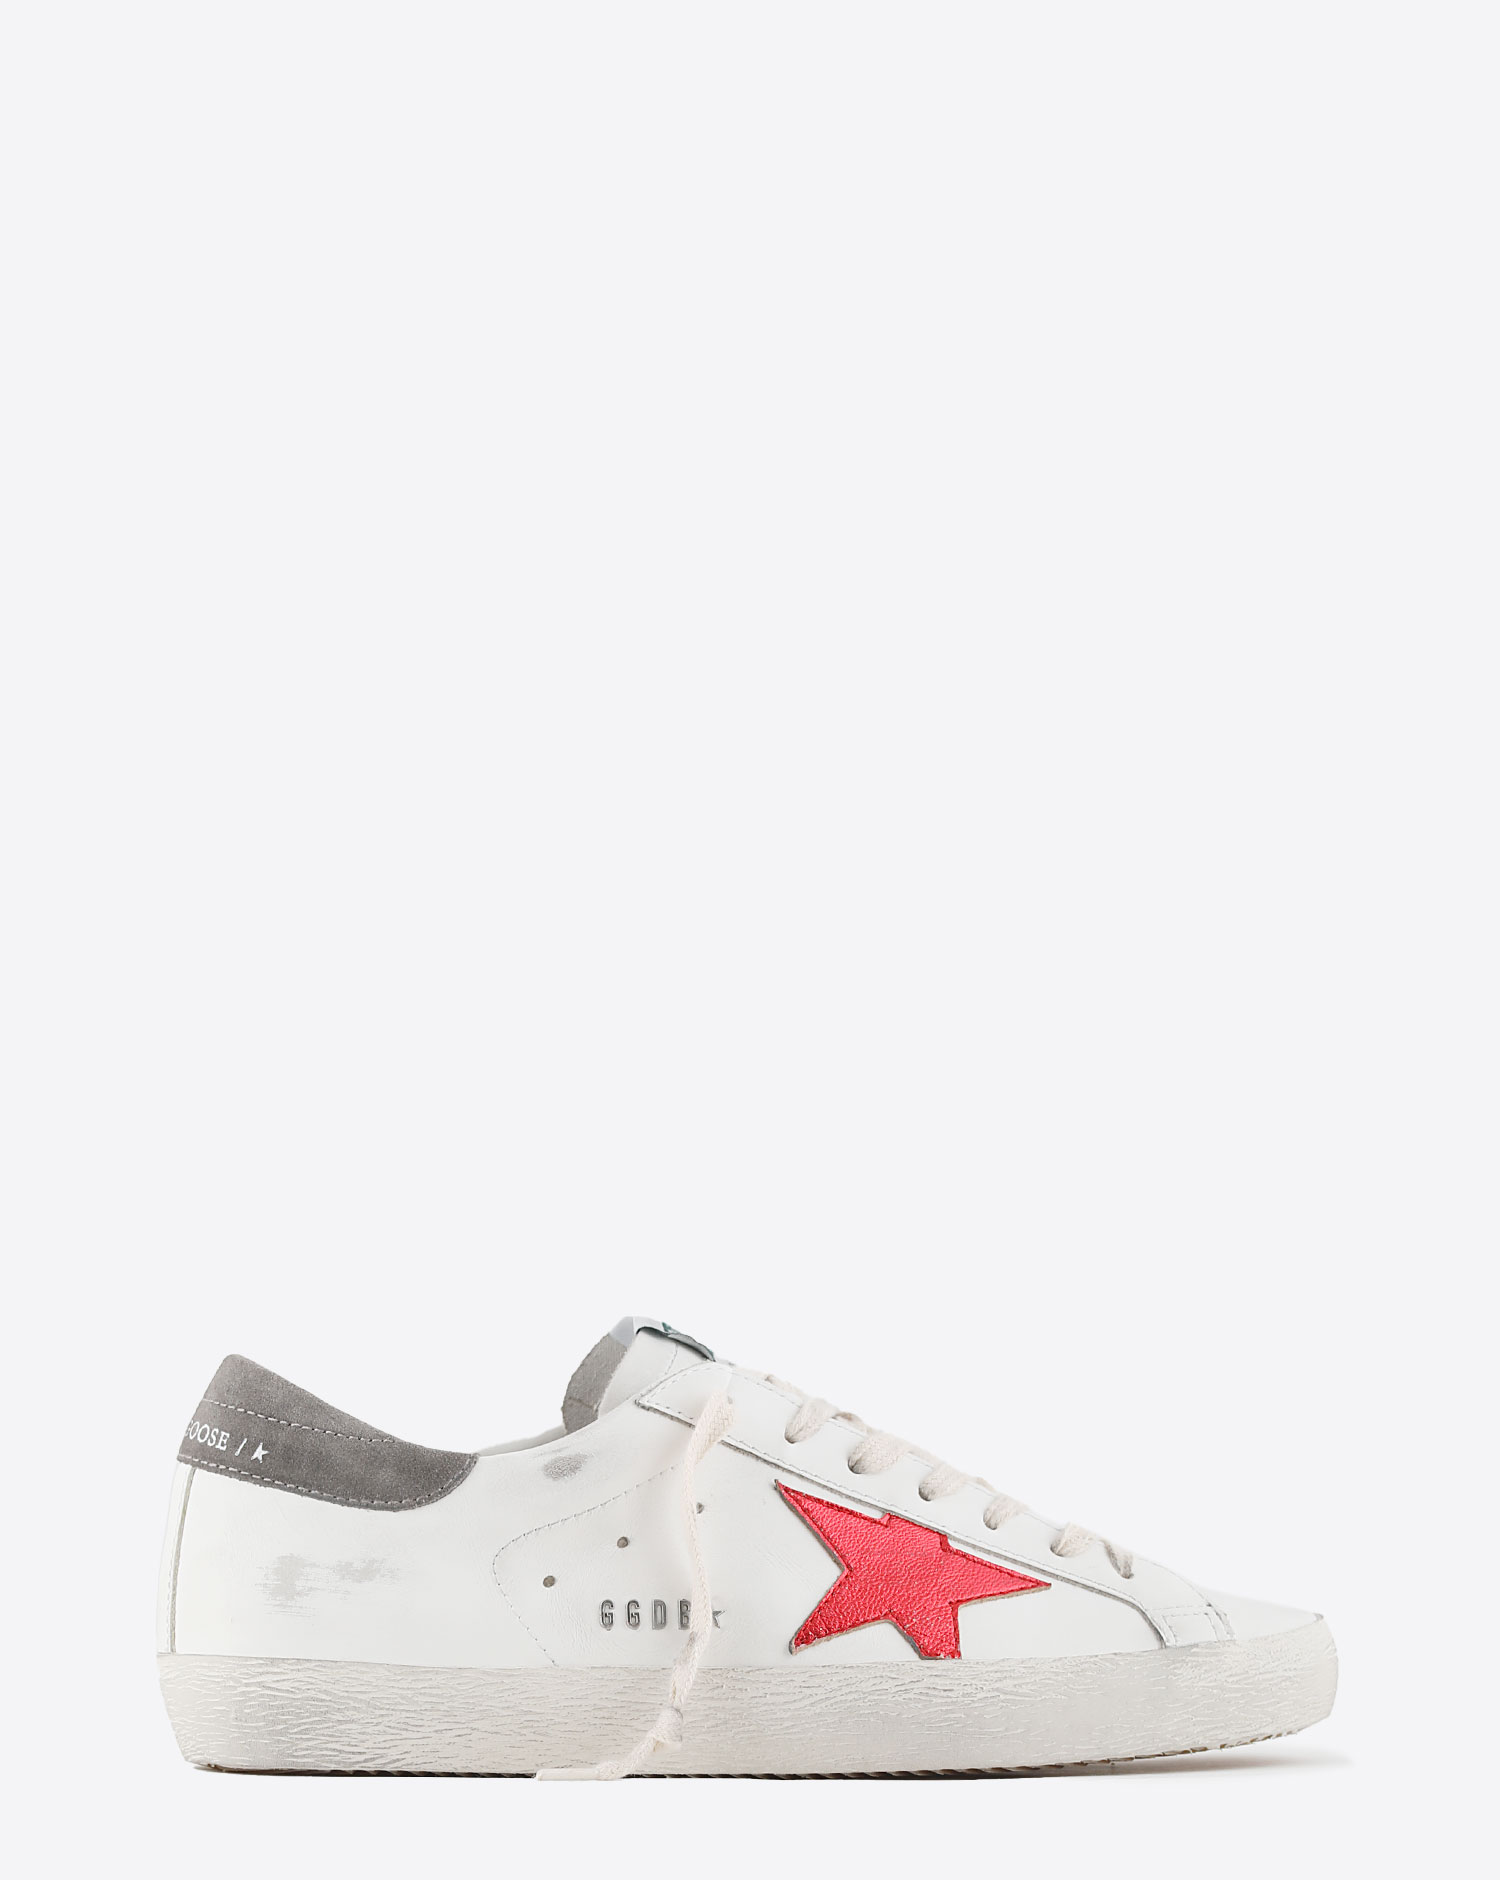 Sneakers Golden Goose Homme Superstar White Red Grey 11390